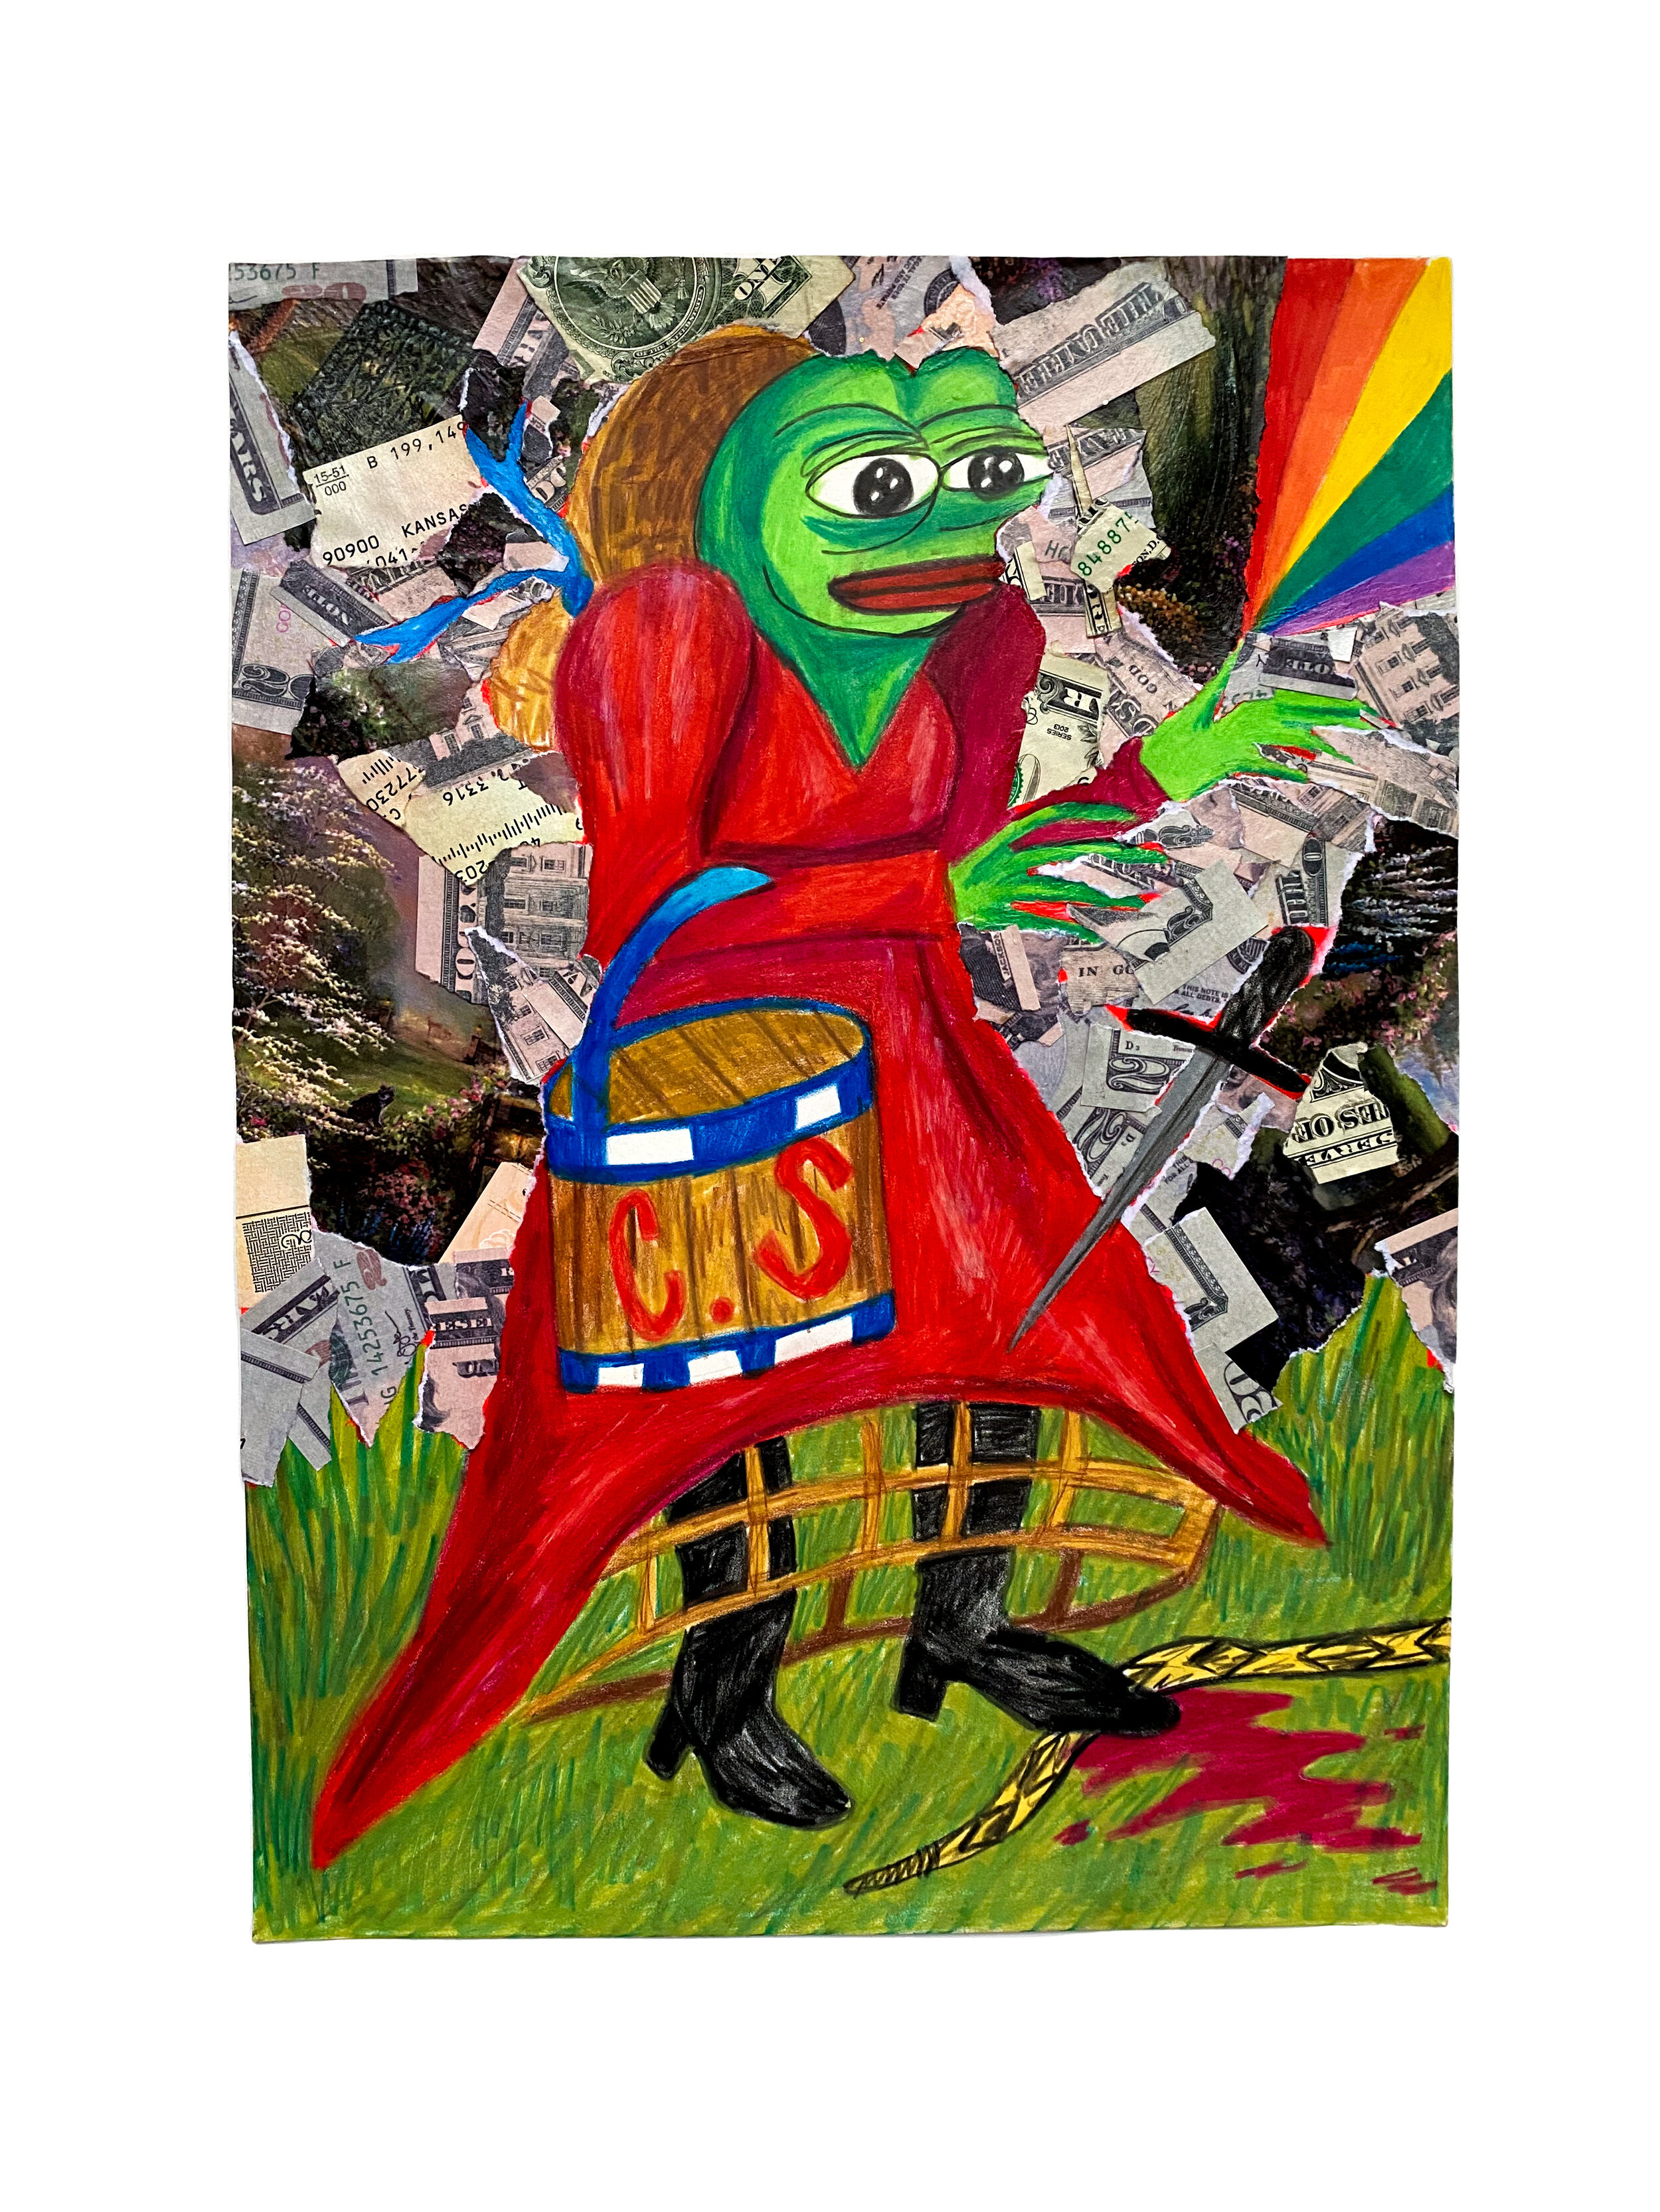   Pepe in Petticoats #1 , 2021  14 x 10  inches (35.56 x 25.4 cm.)  Colored pencil, fake money, acrylic paint, Modge Podge, and Thomas Kinkade print on paper 